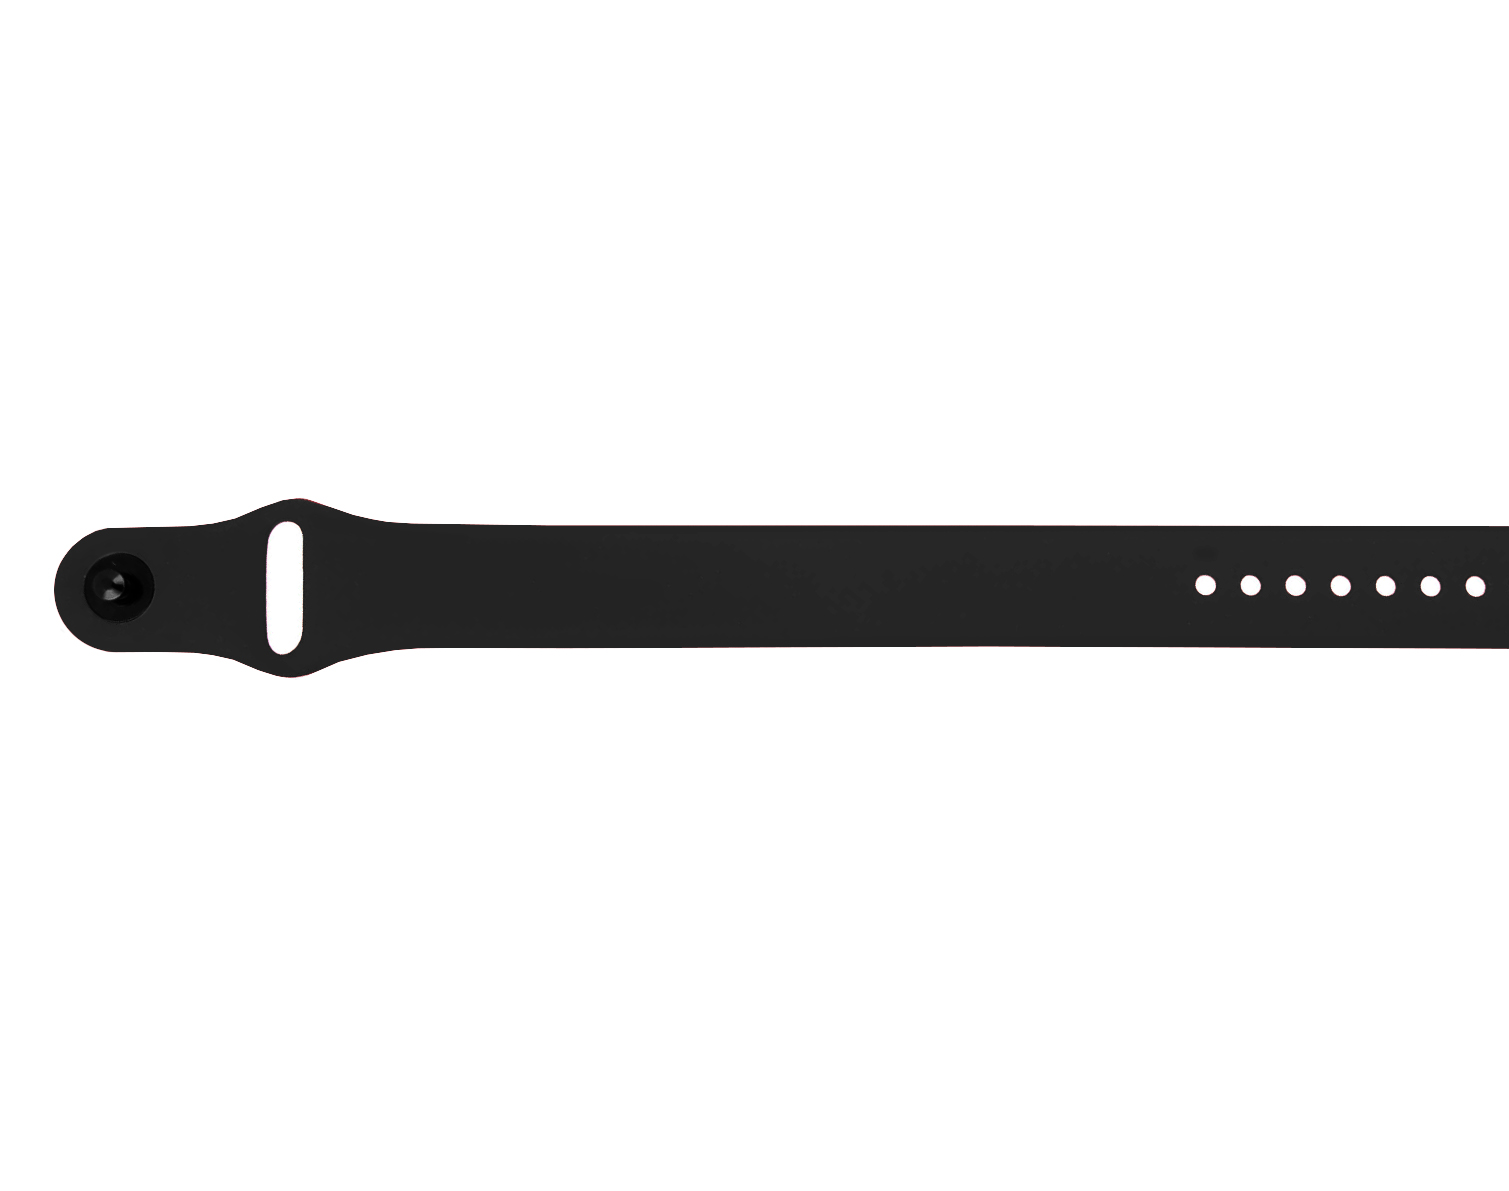 Part of a black silicone strap for wrist with popper fastener.